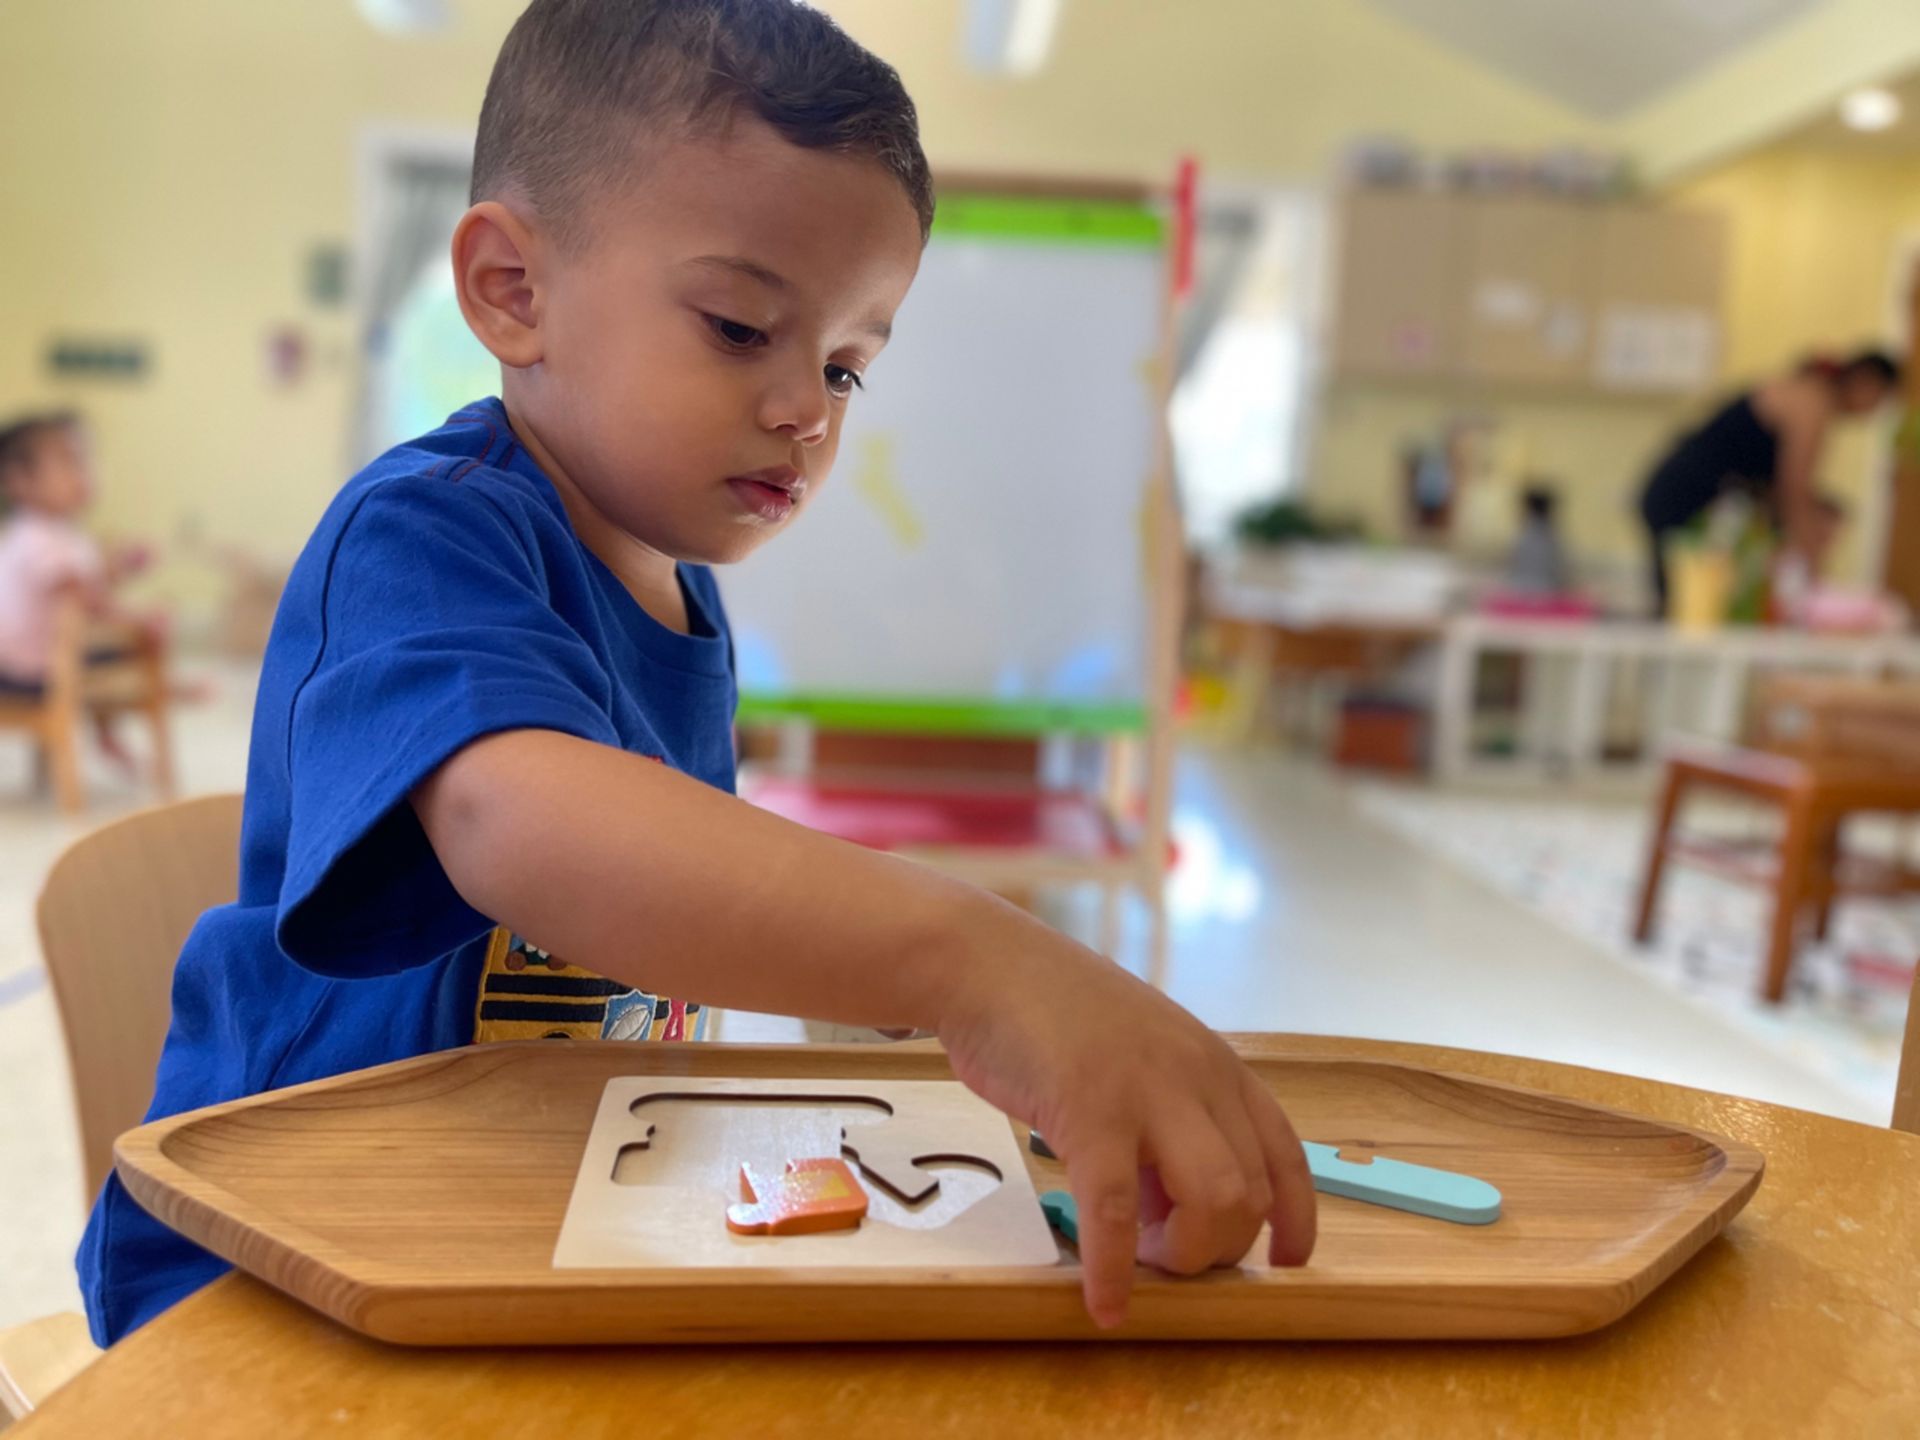 A Montessori child in a blue shirt is playing with a wooden tray